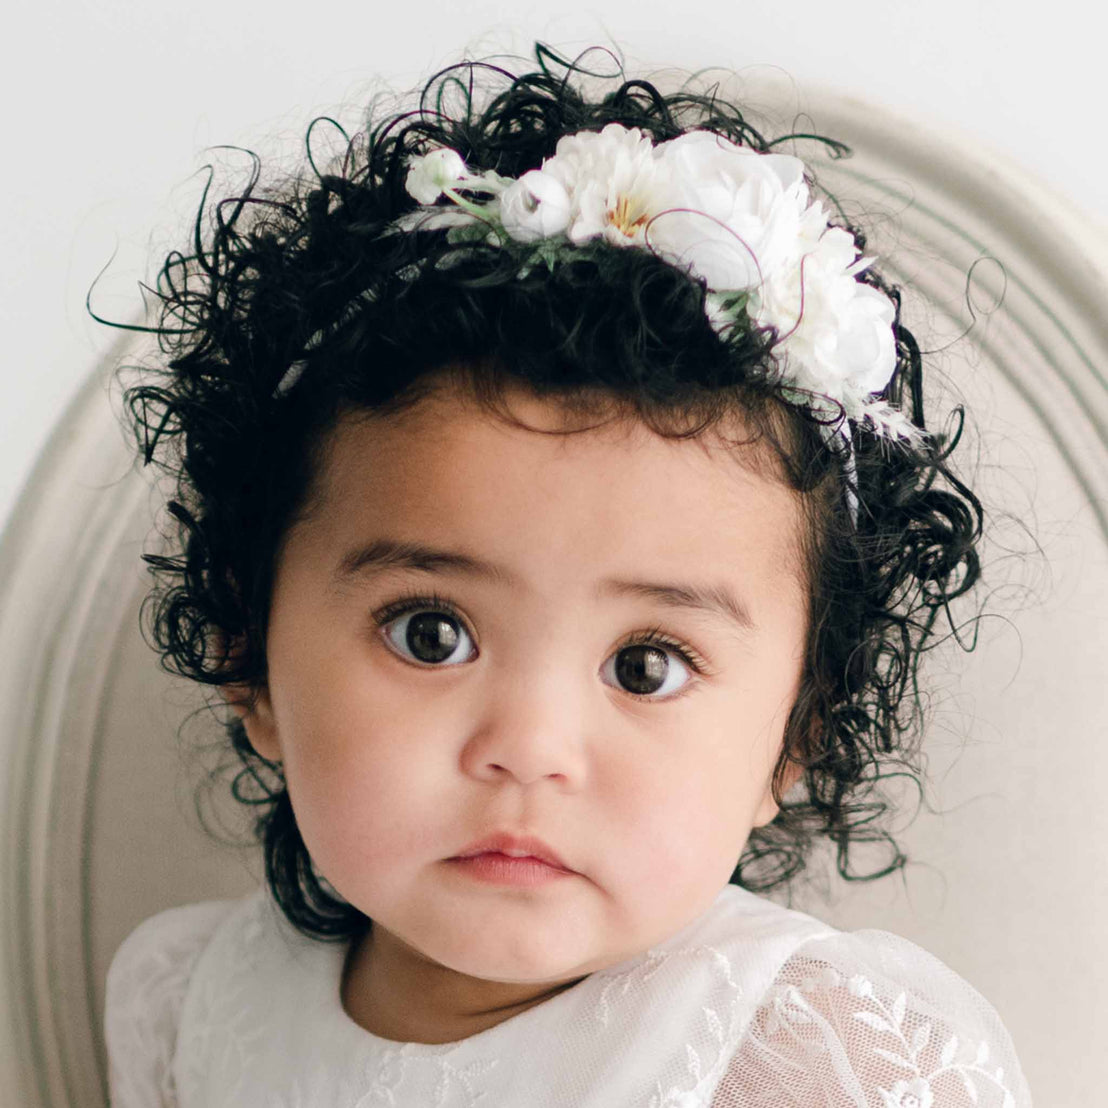 A baby with curly dark hair adorned with the Ella Flower Headband featuring white flowers sits against a neutral-colored background. Their expression is calm and curious.